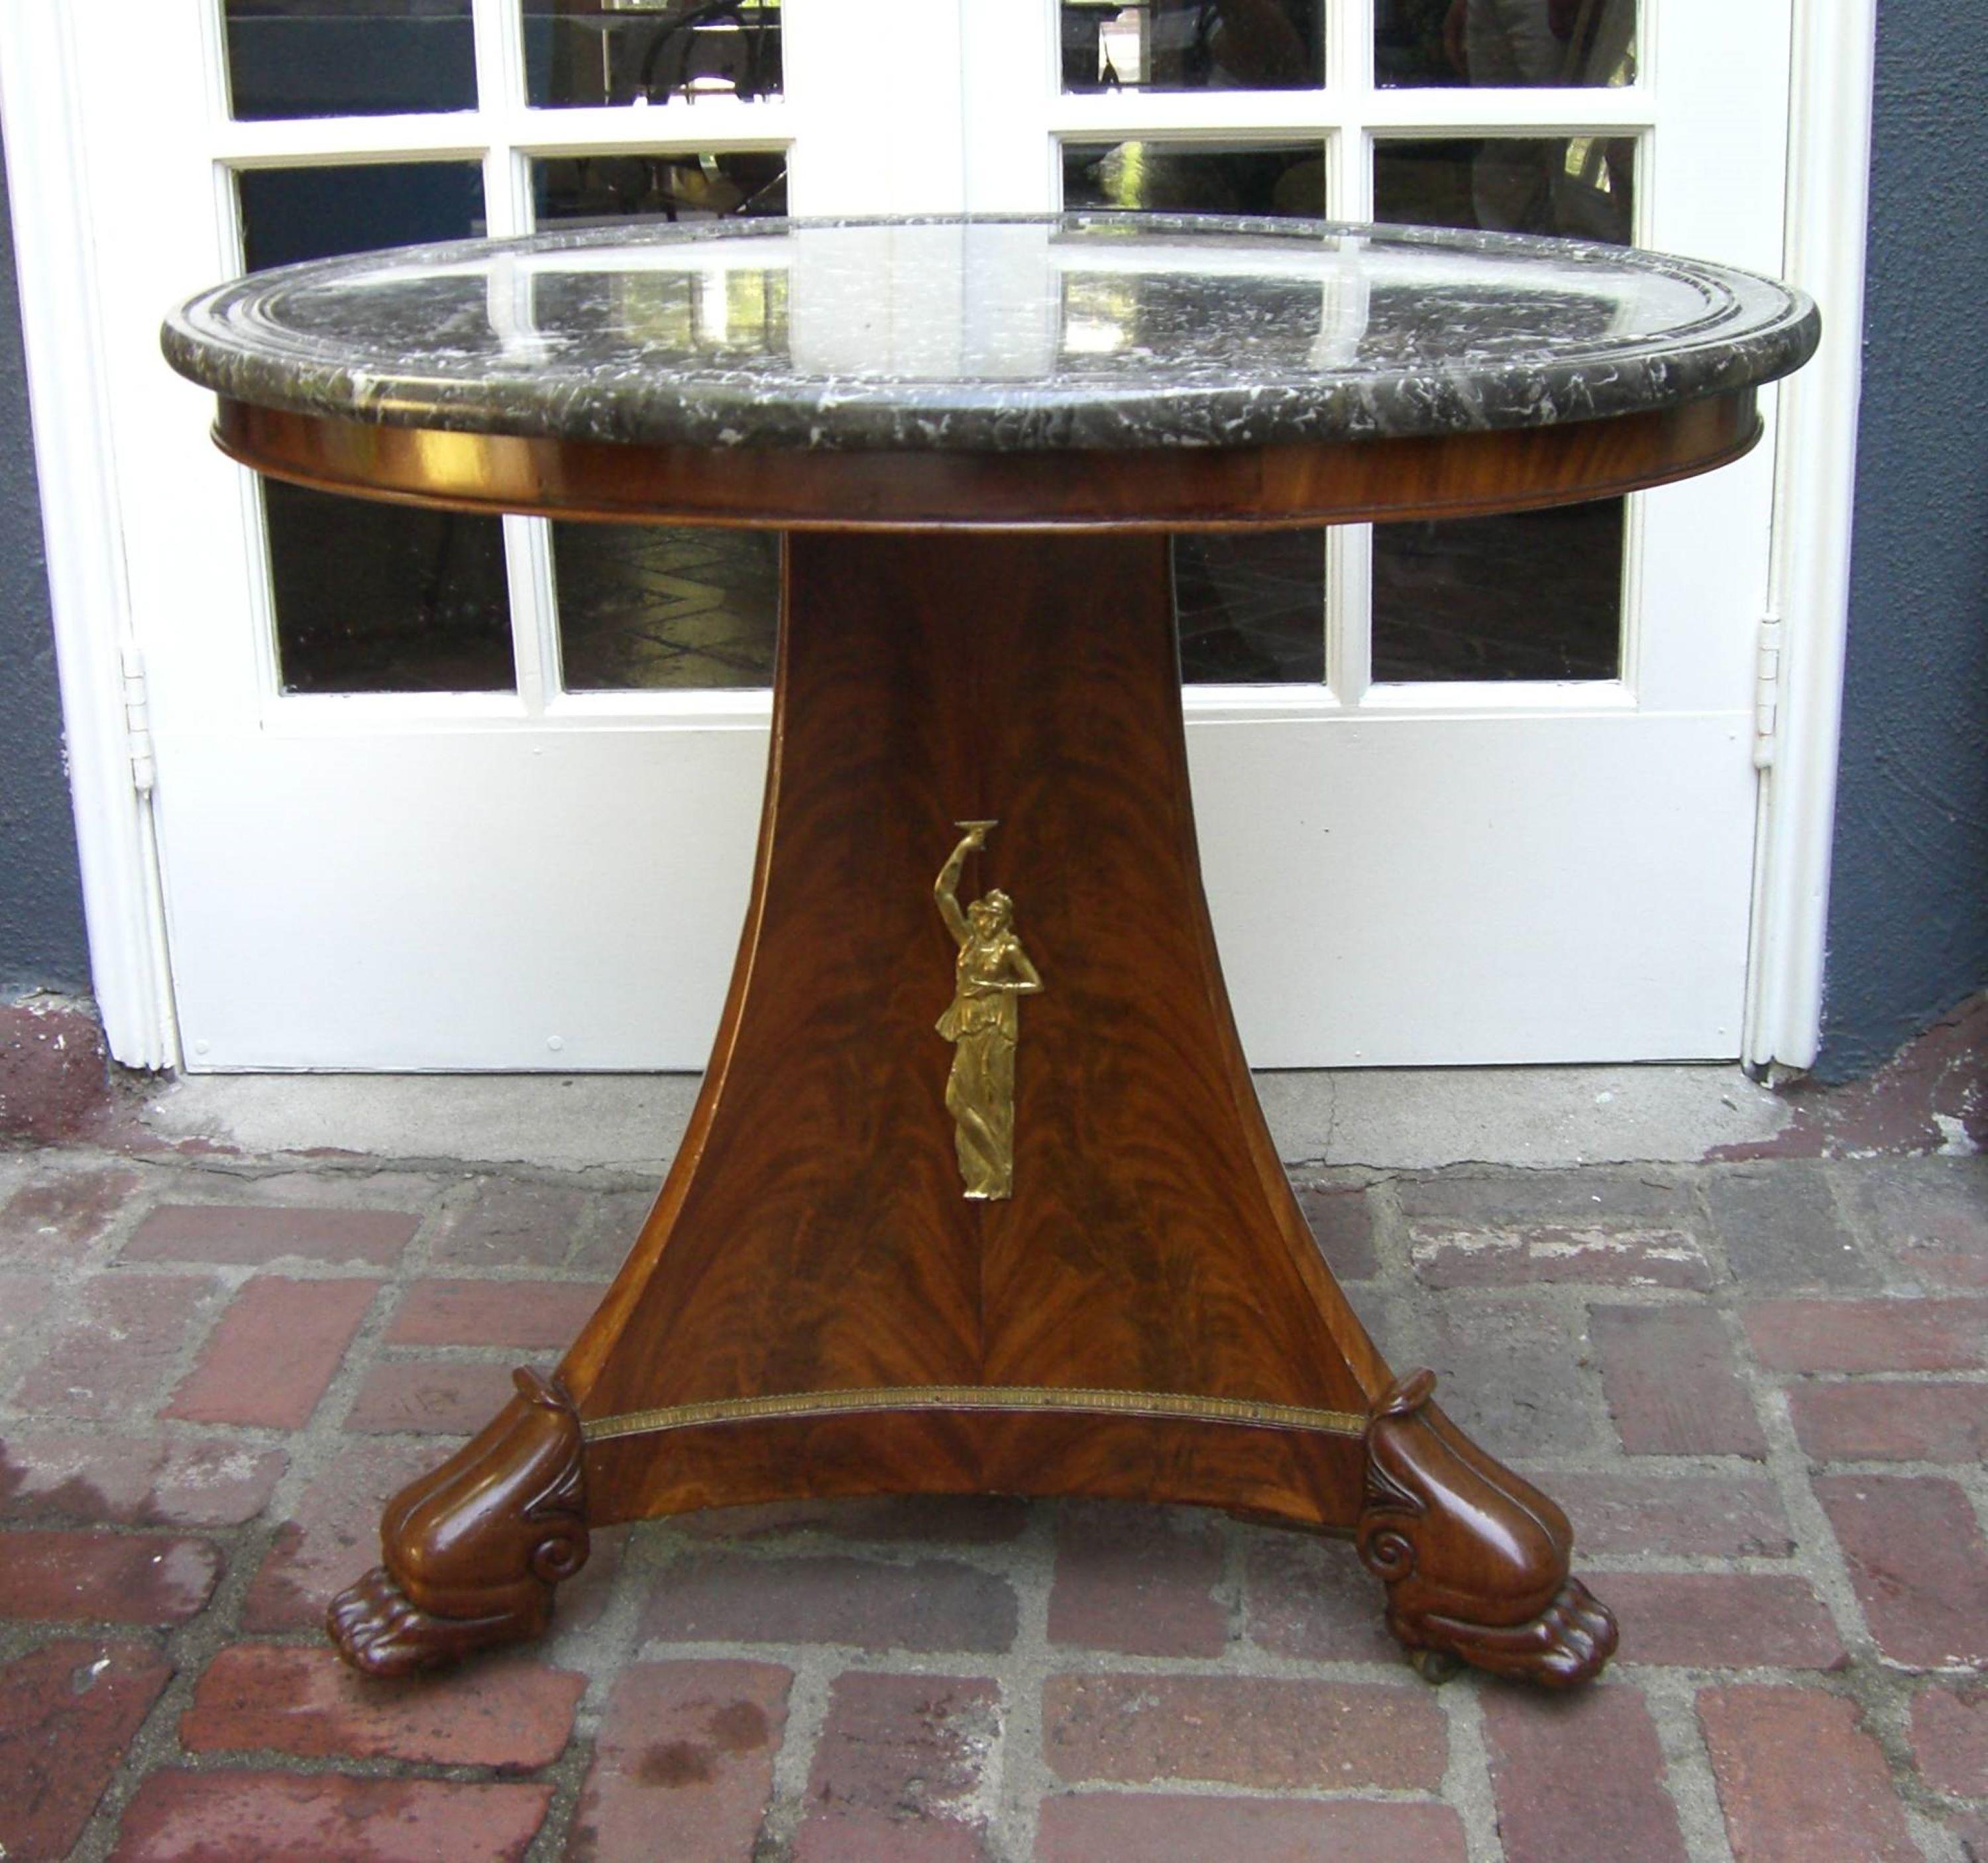 George Jacob Desmalter Empire Gueridon Round center Table Estampille 19th C. LA . Rare Exquisite Early 19th century Empire Gueridon with classical decoration on a tripod base Estampille: George Jacob (furniture maker of the emperor) circa 1810.